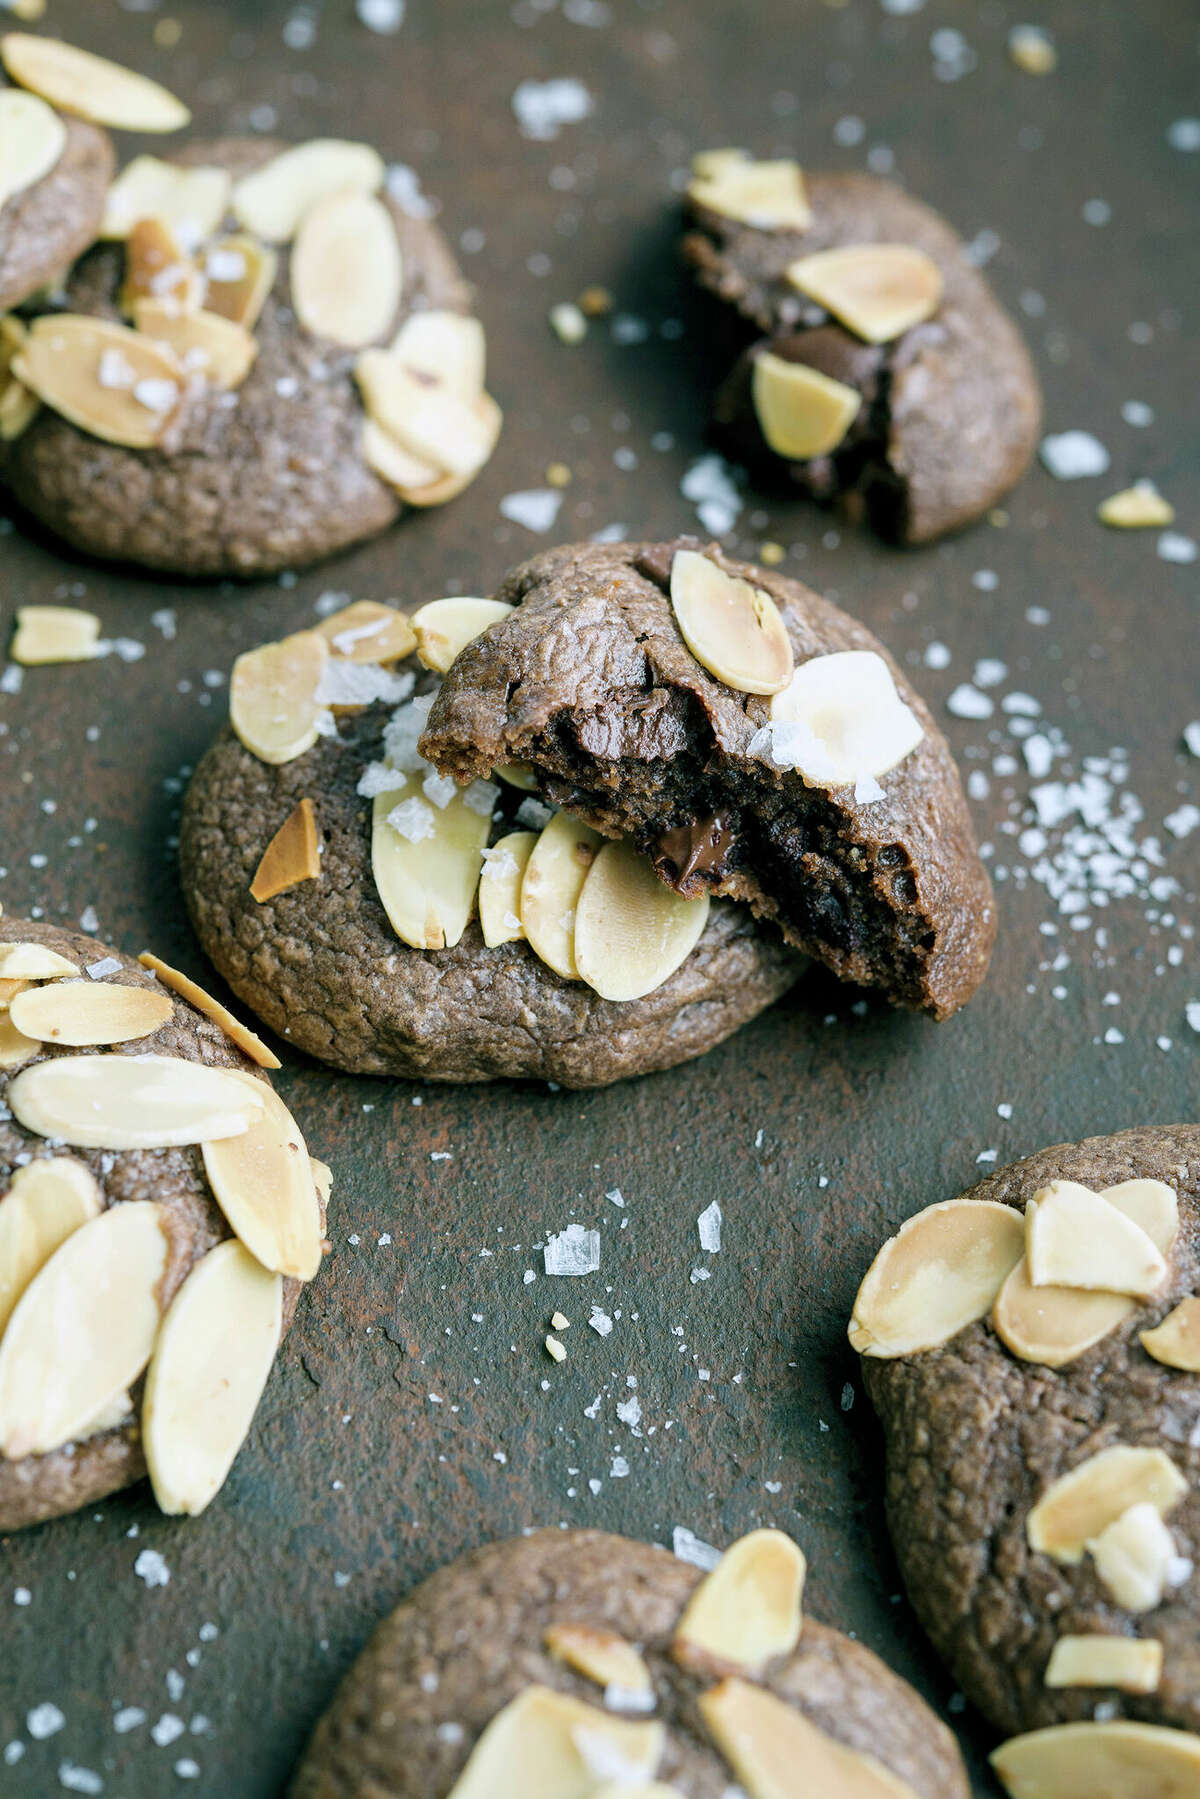 Triple Chocolate Almond Cookies benefit from the use of almond butter in the dough.